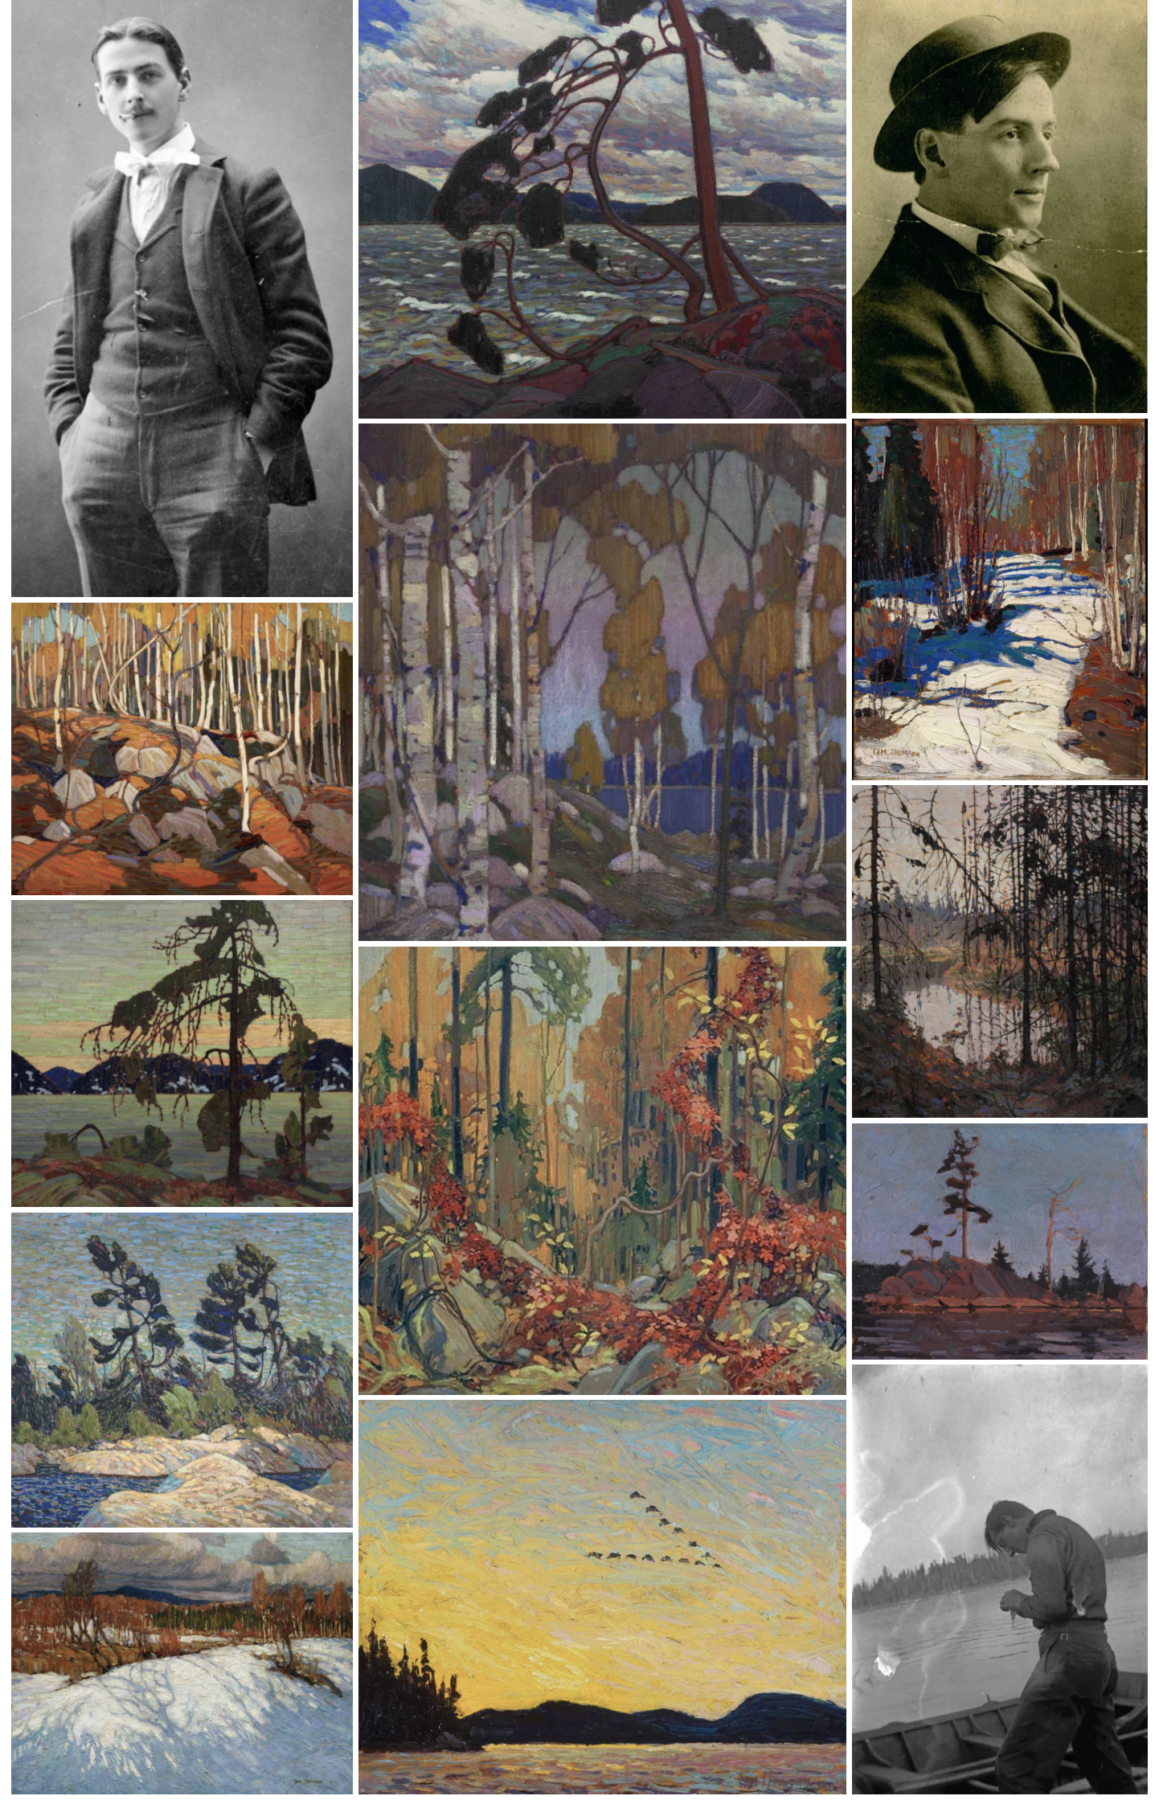 Tom Thomson - Canadian artist renowned for Canadian paintings and artwork